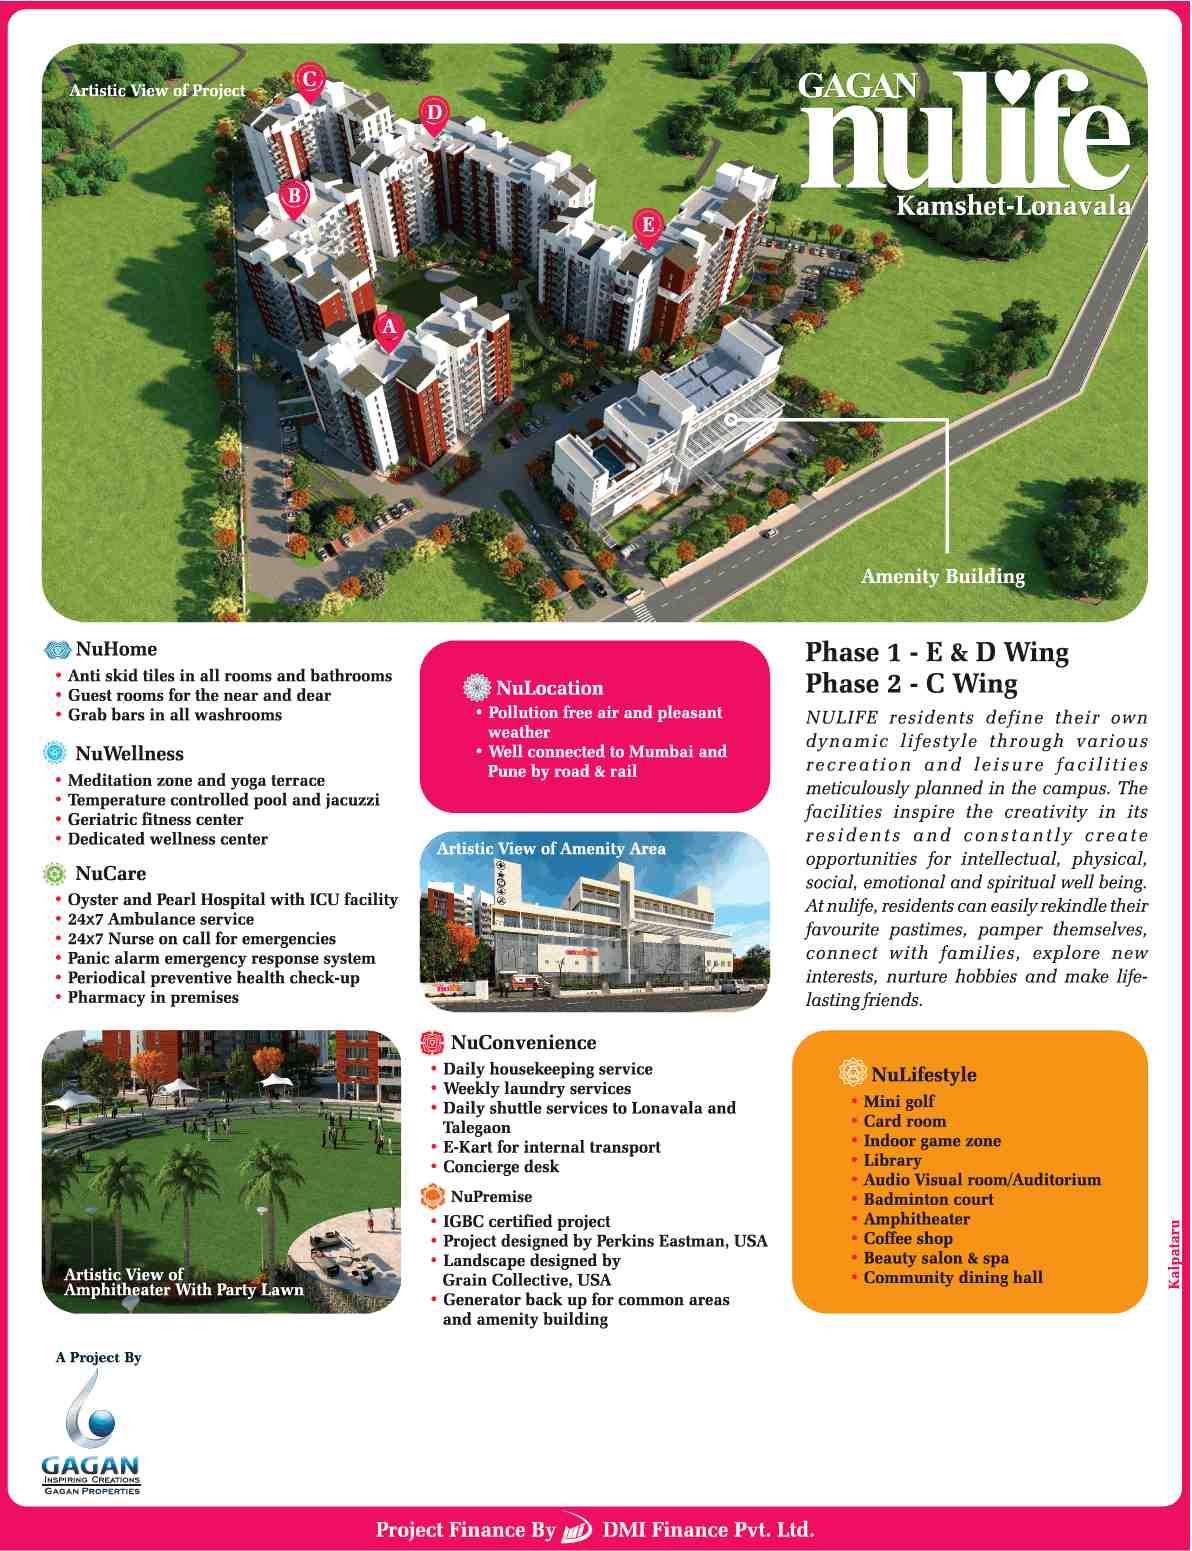 Experience a dynamic lifestyle at Gagan Nulife in Pune Update